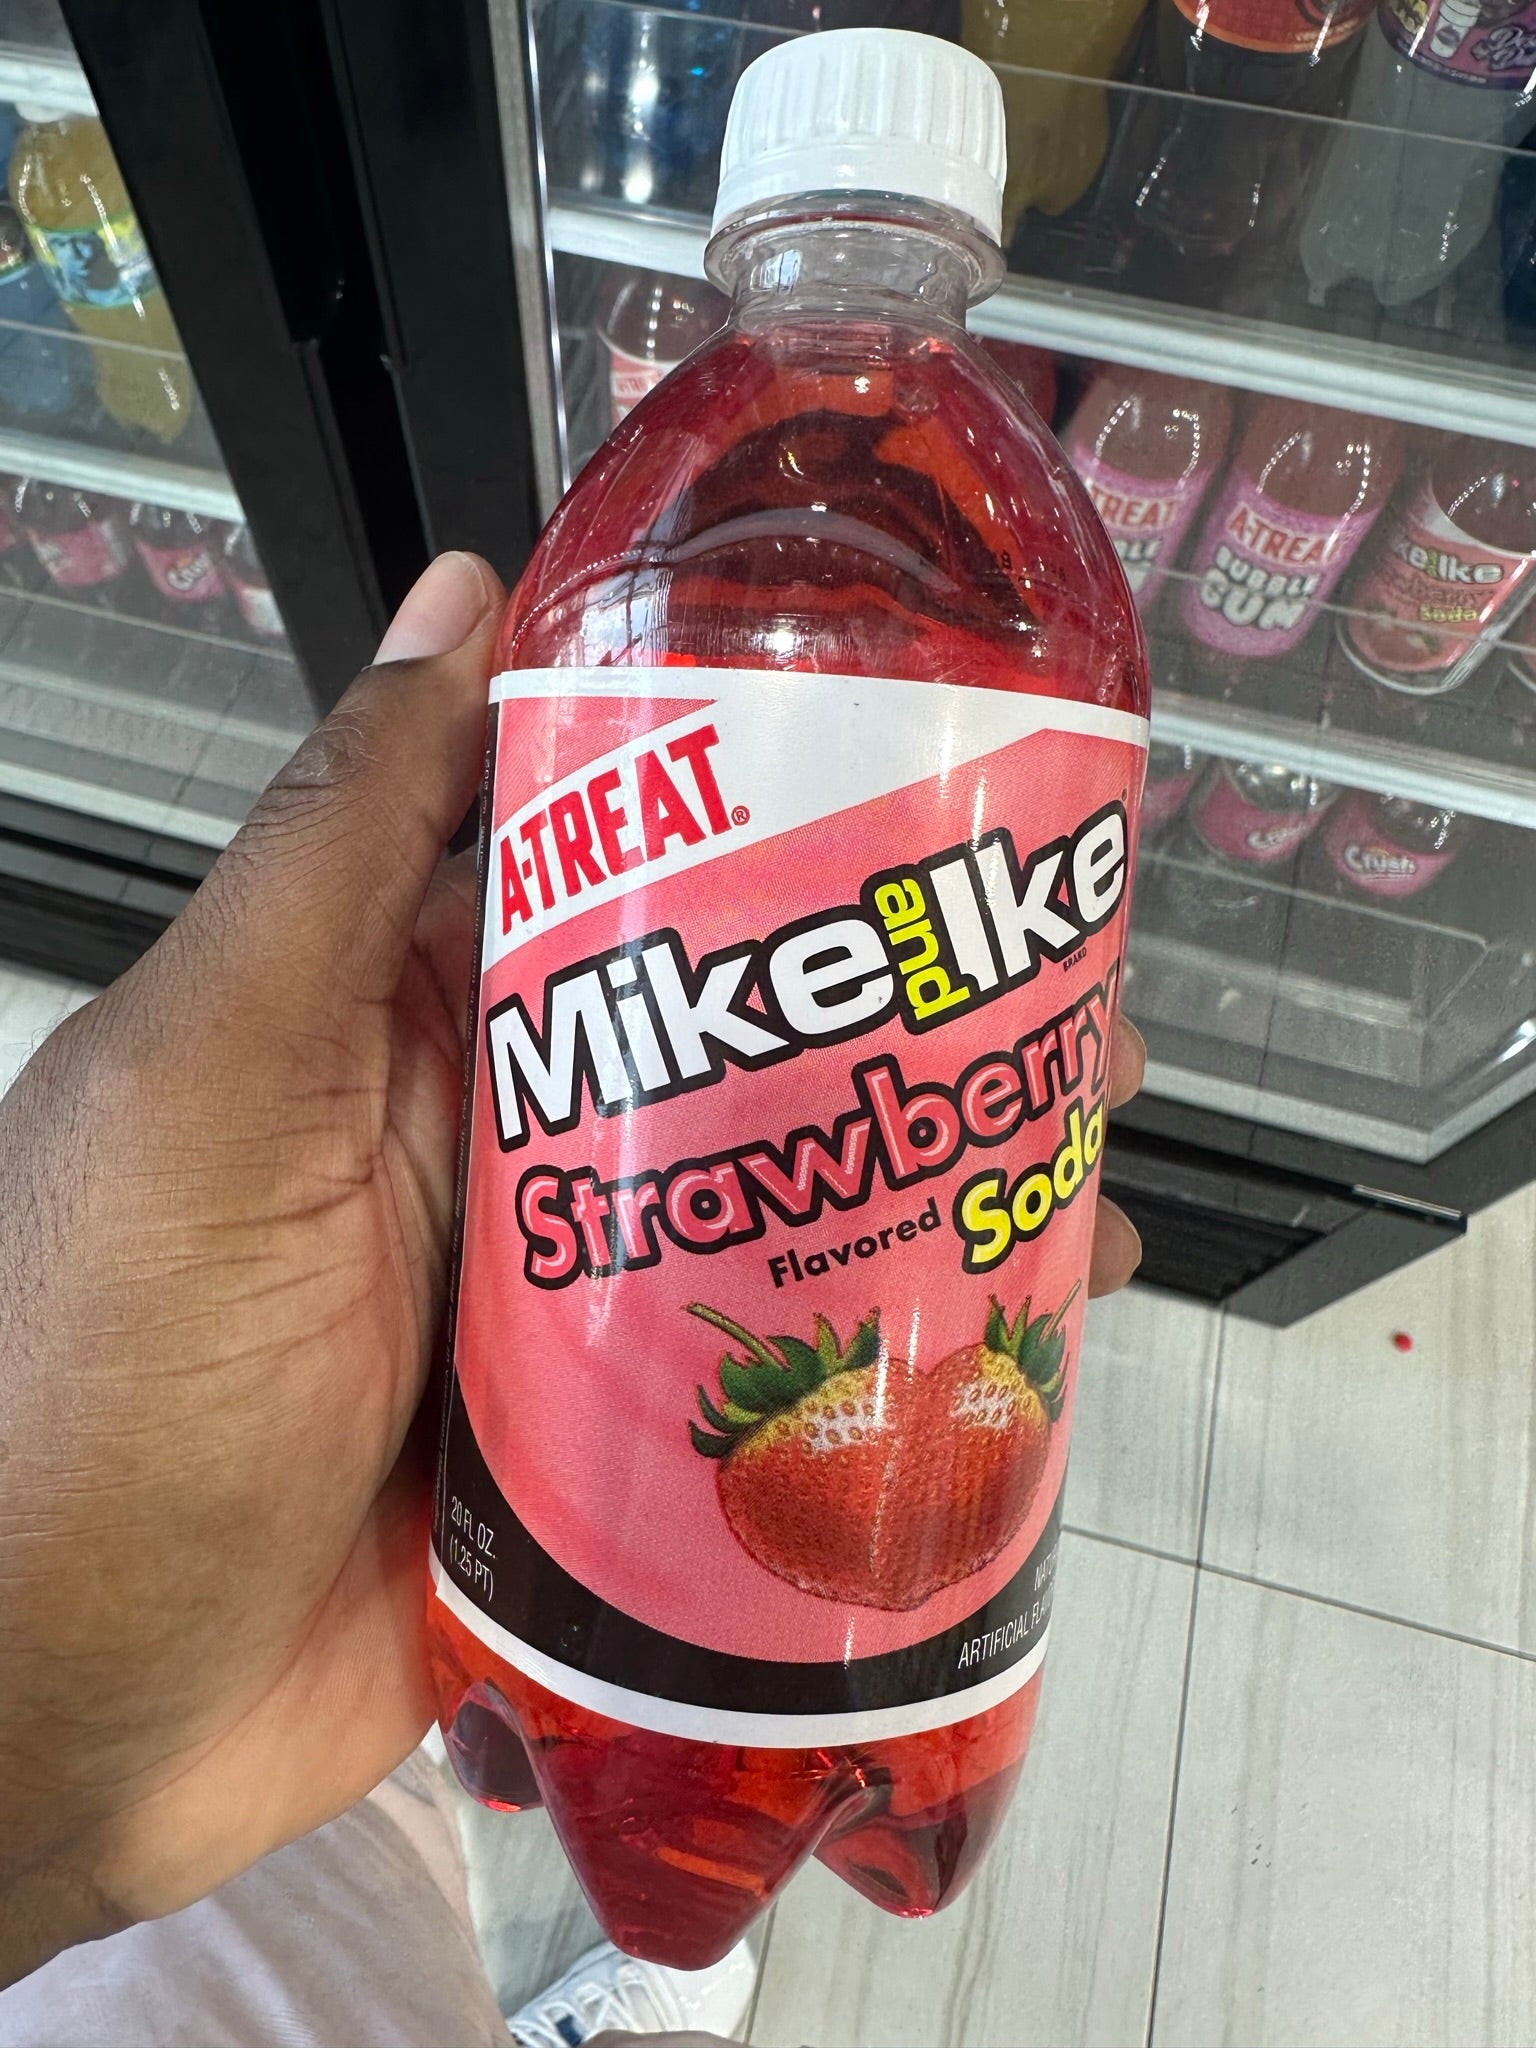 A-Treat Mike and Ike Strawberry Soda